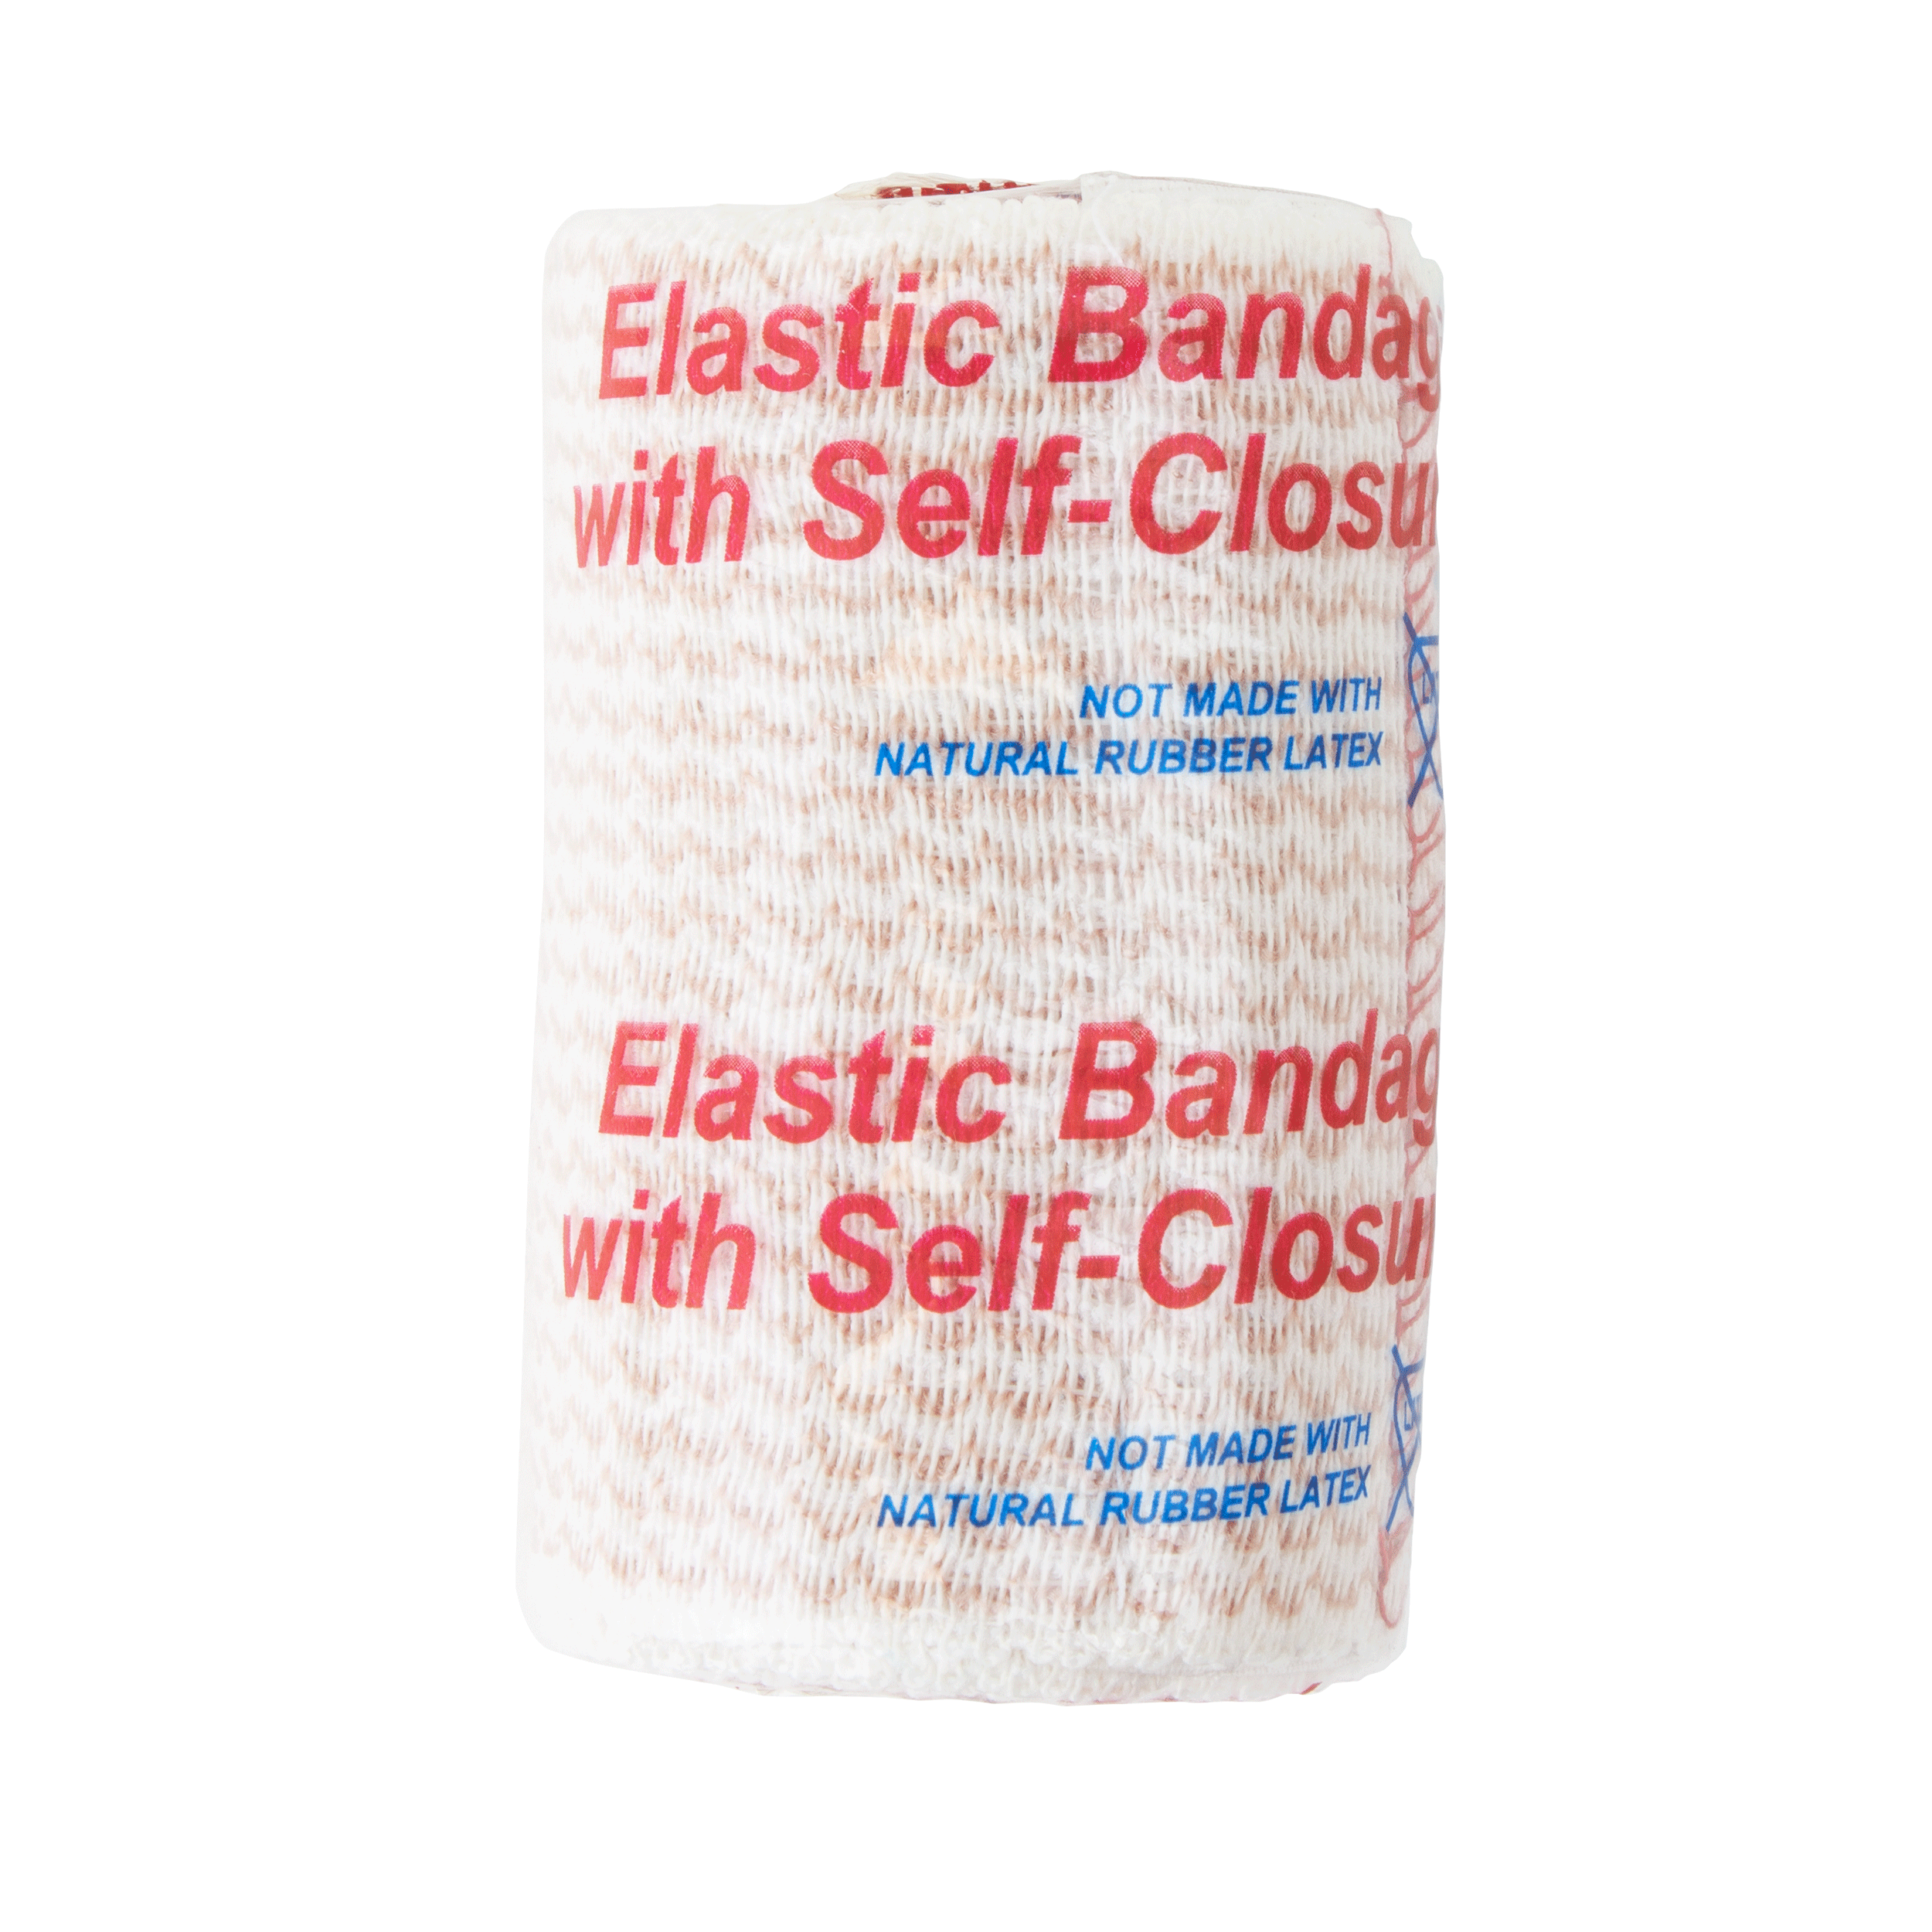 Elastic Bandage with Self-Closure 3in x 5yds